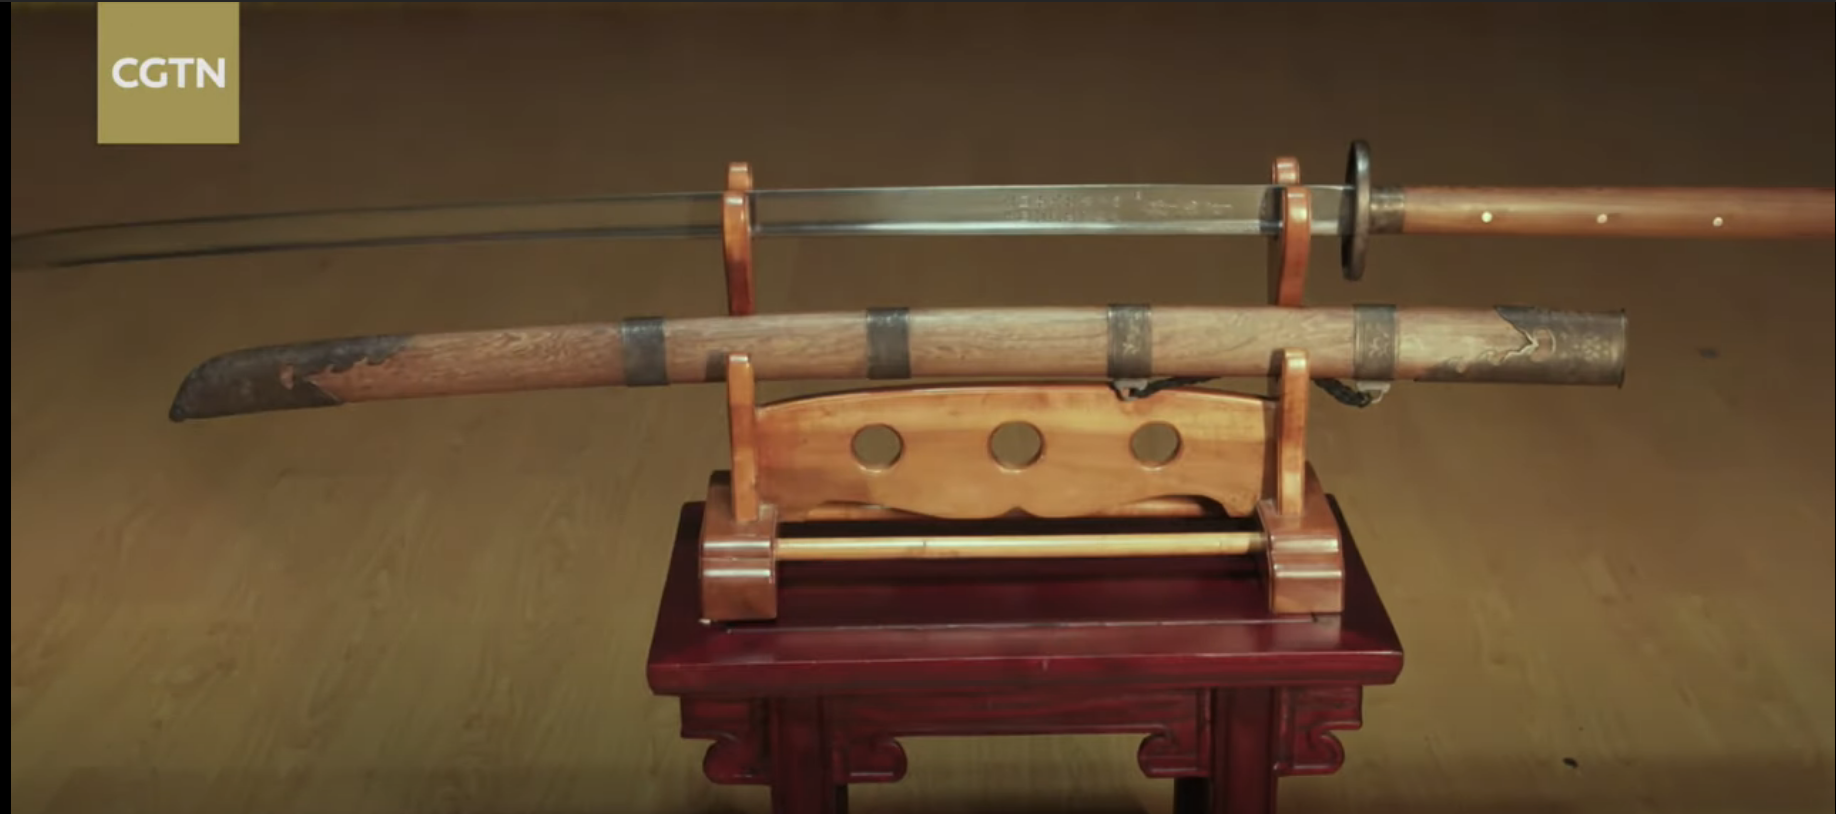 Old or New? The Miaodao and Invention in Chinese Martial Arts